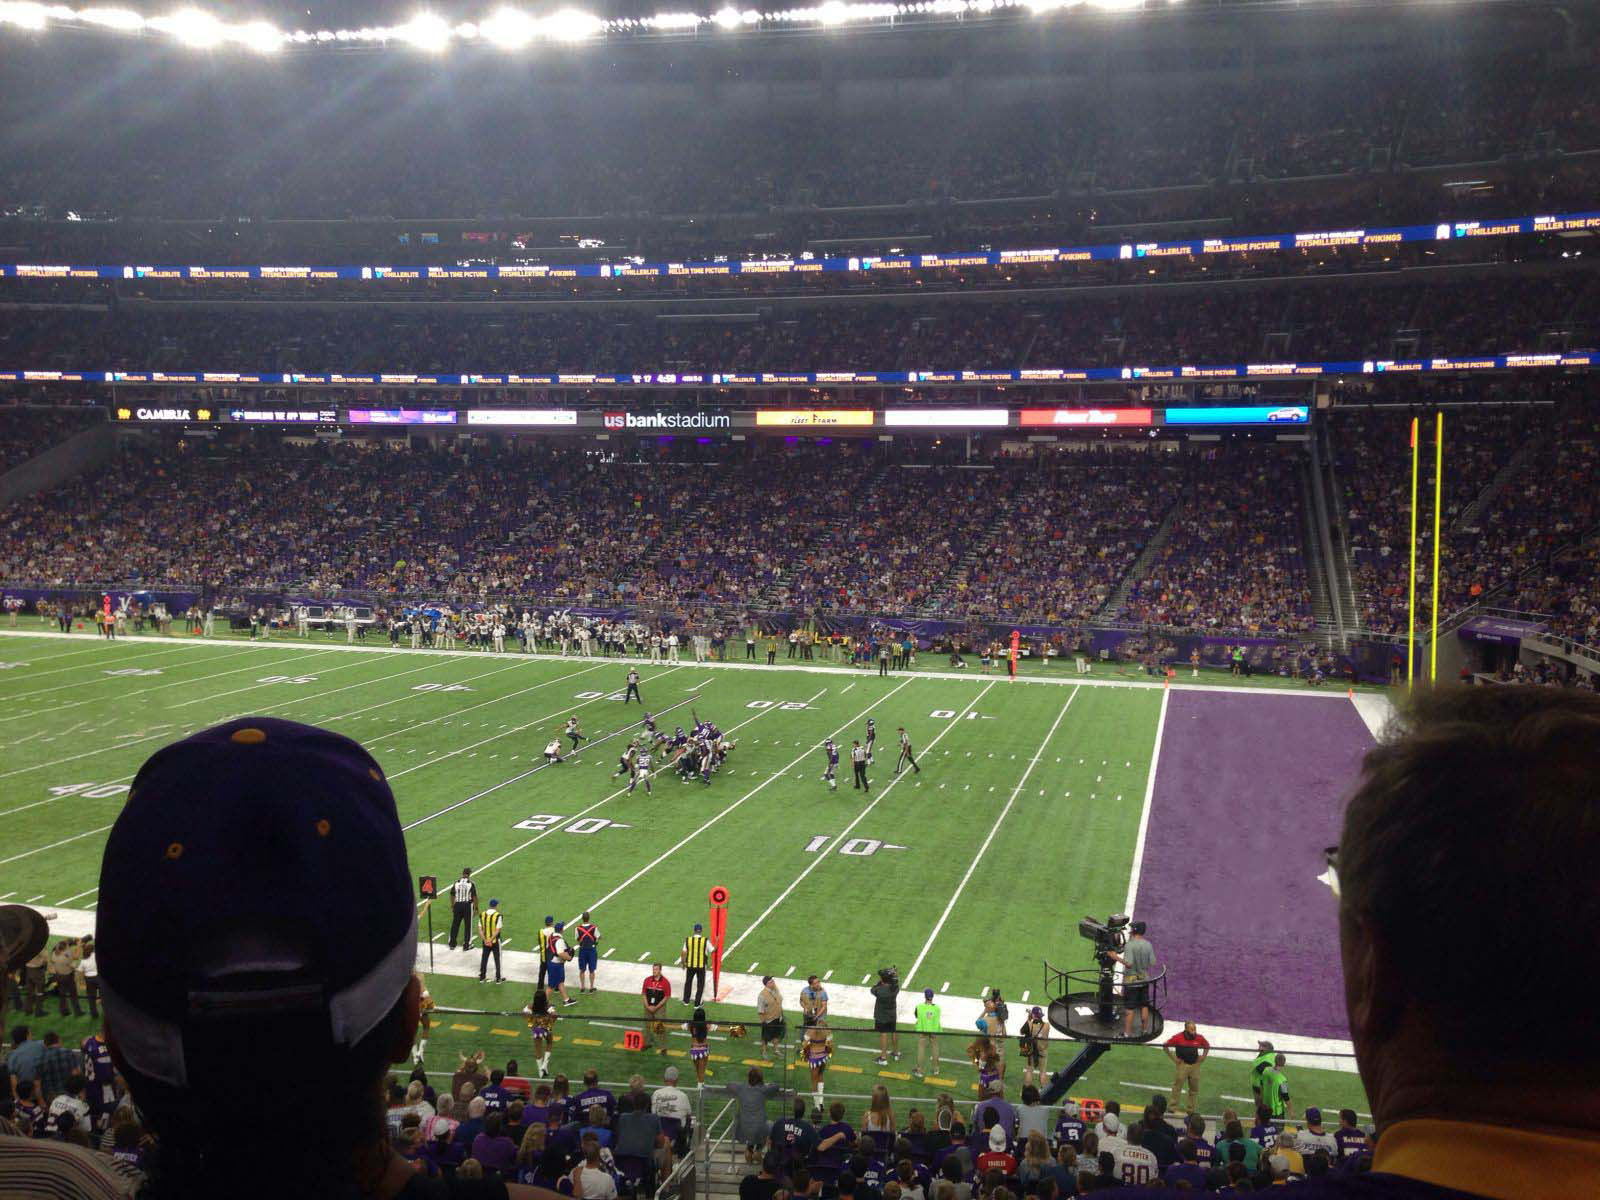 section 128, row 3 seat view  for football - u.s. bank stadium